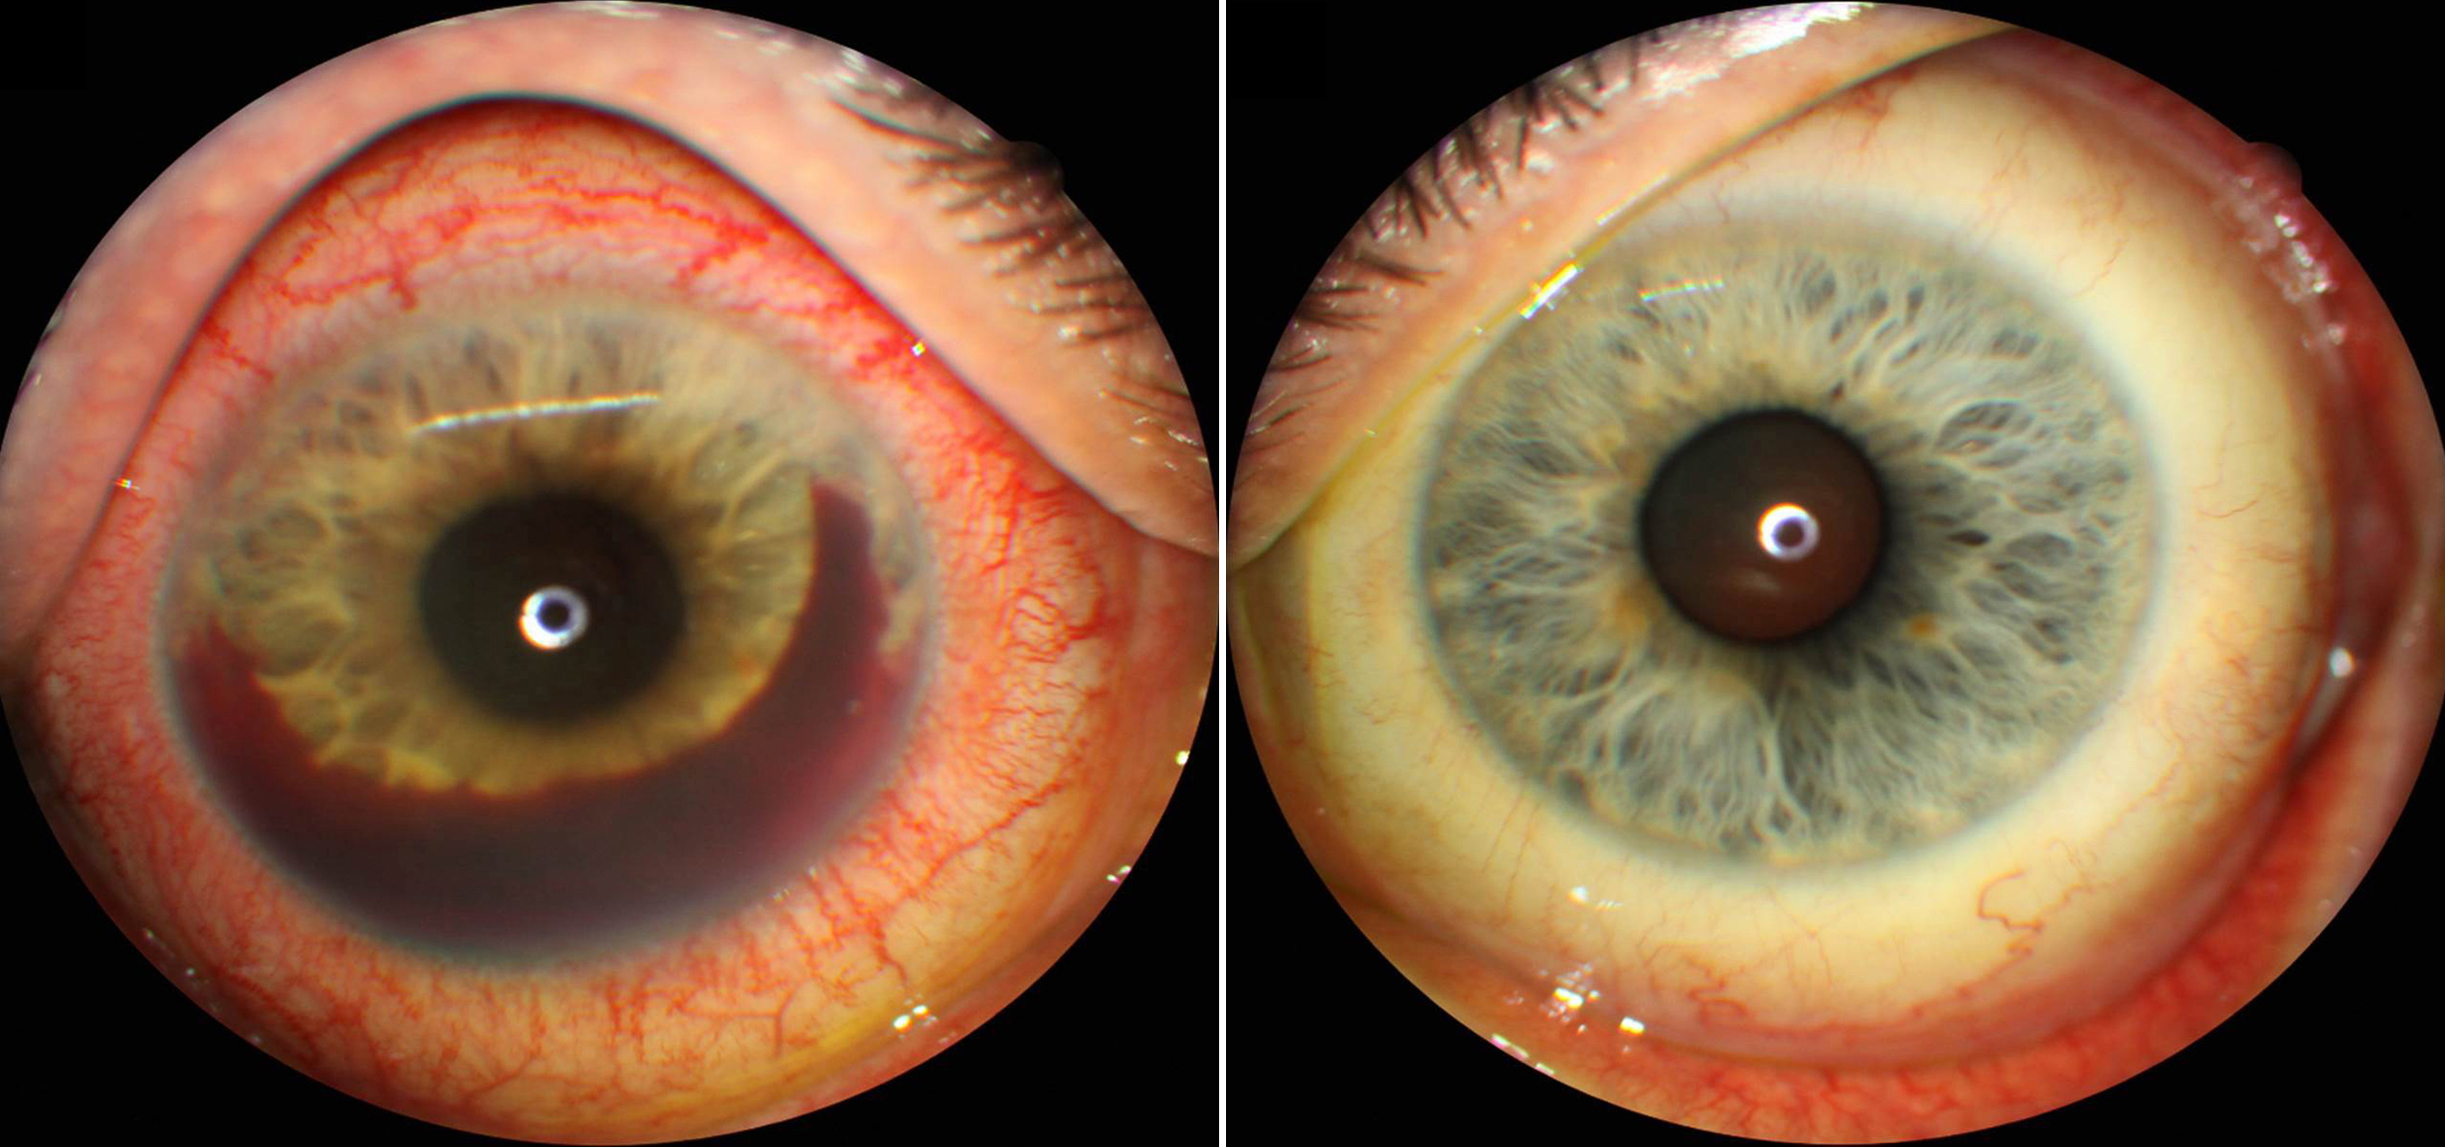 A 45-year-old man with spontaneous hyphema of the right eye